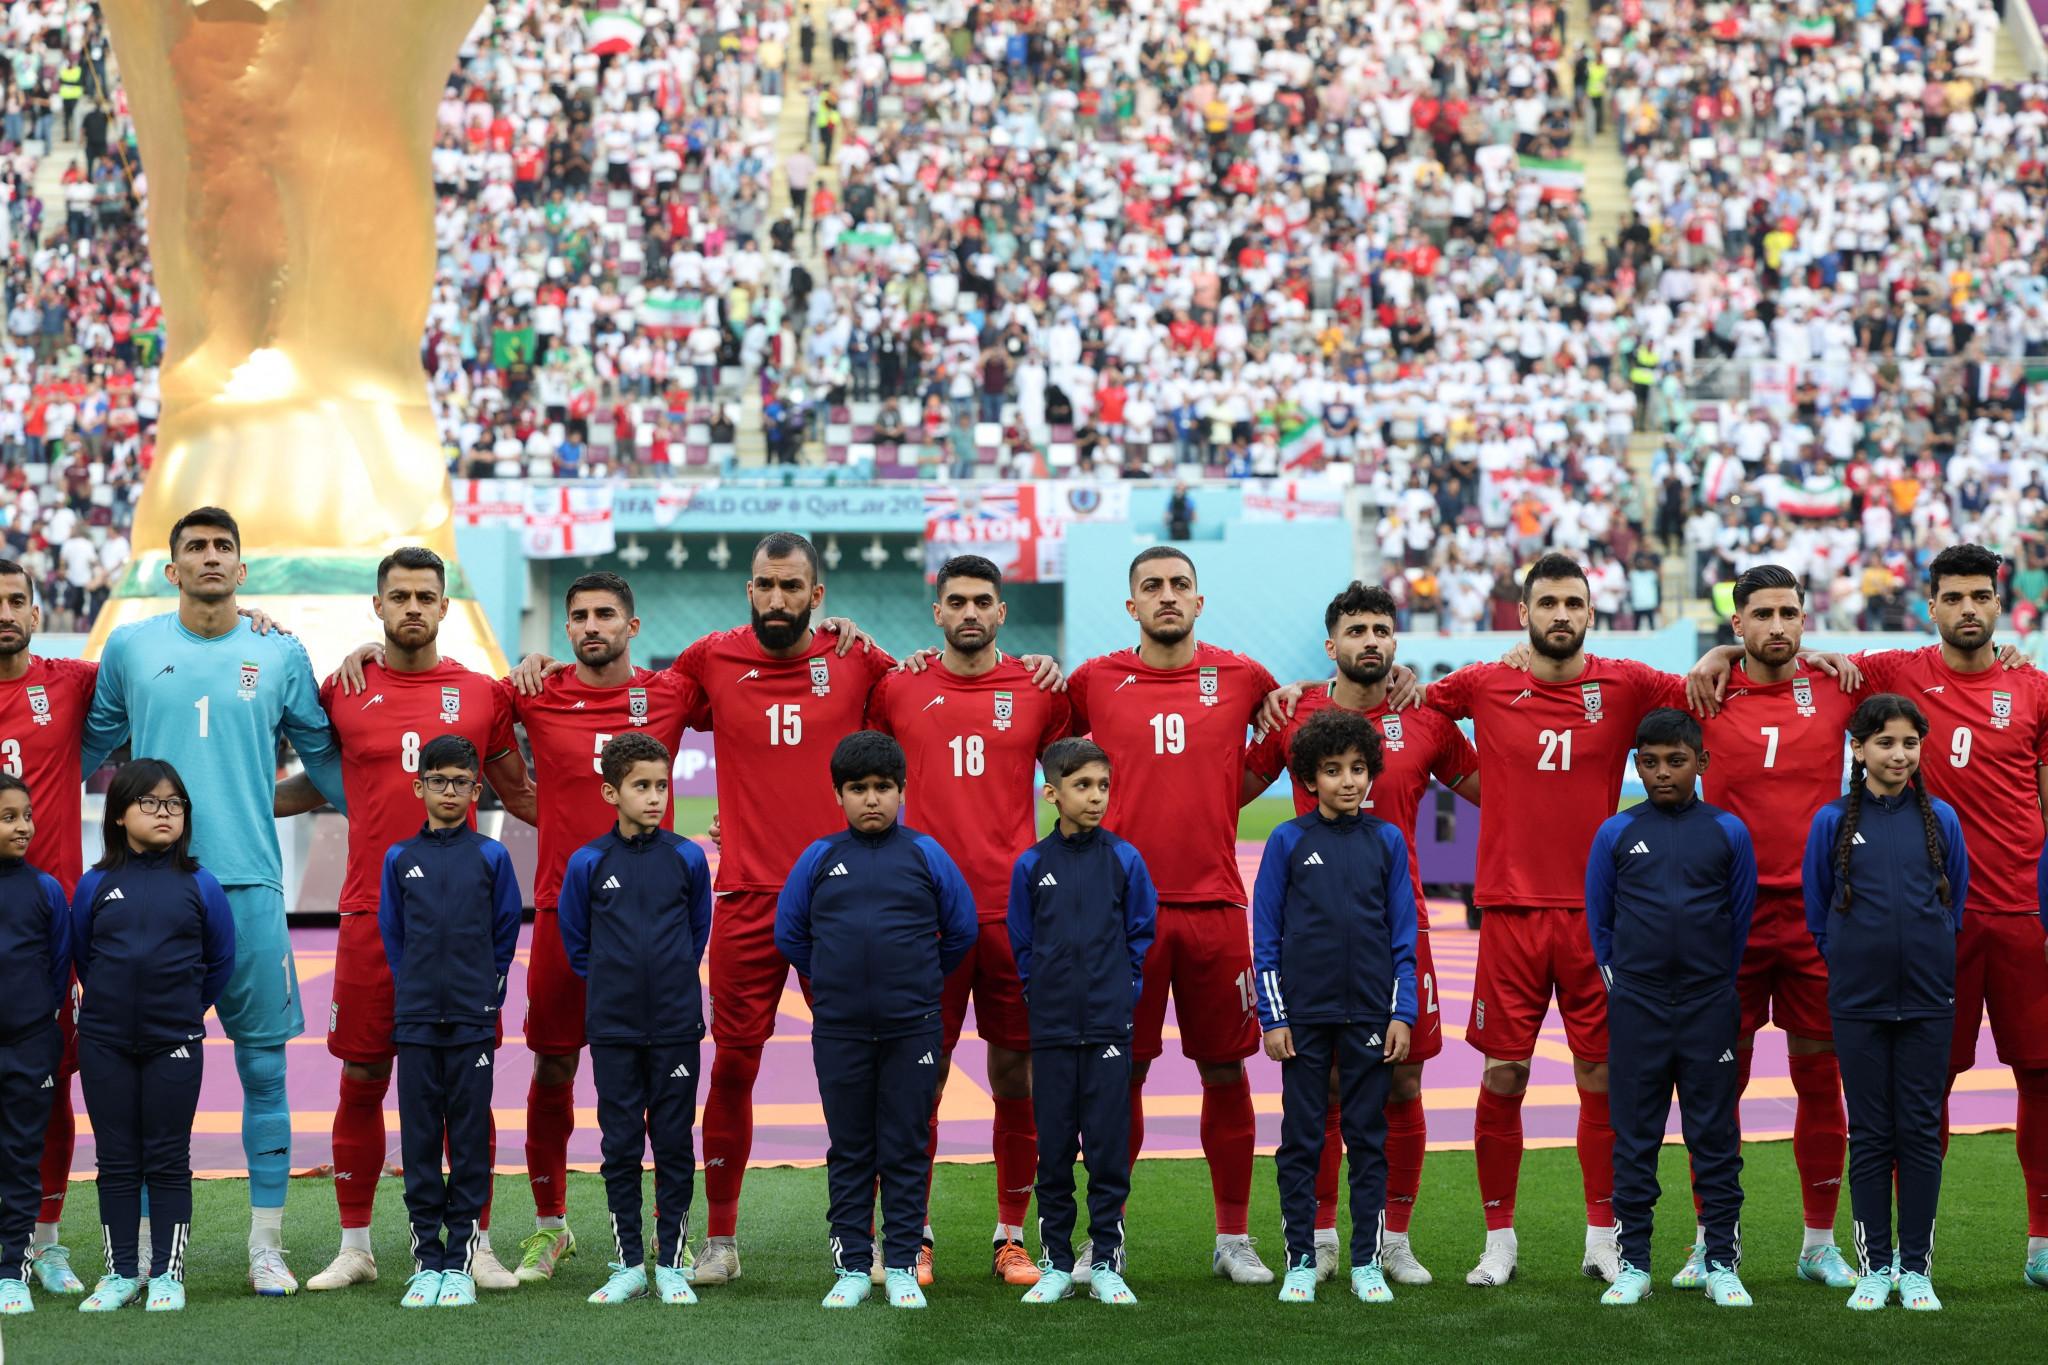 Iran's football team chose not to sing the country's national anthem before the match against England ©Getty Images